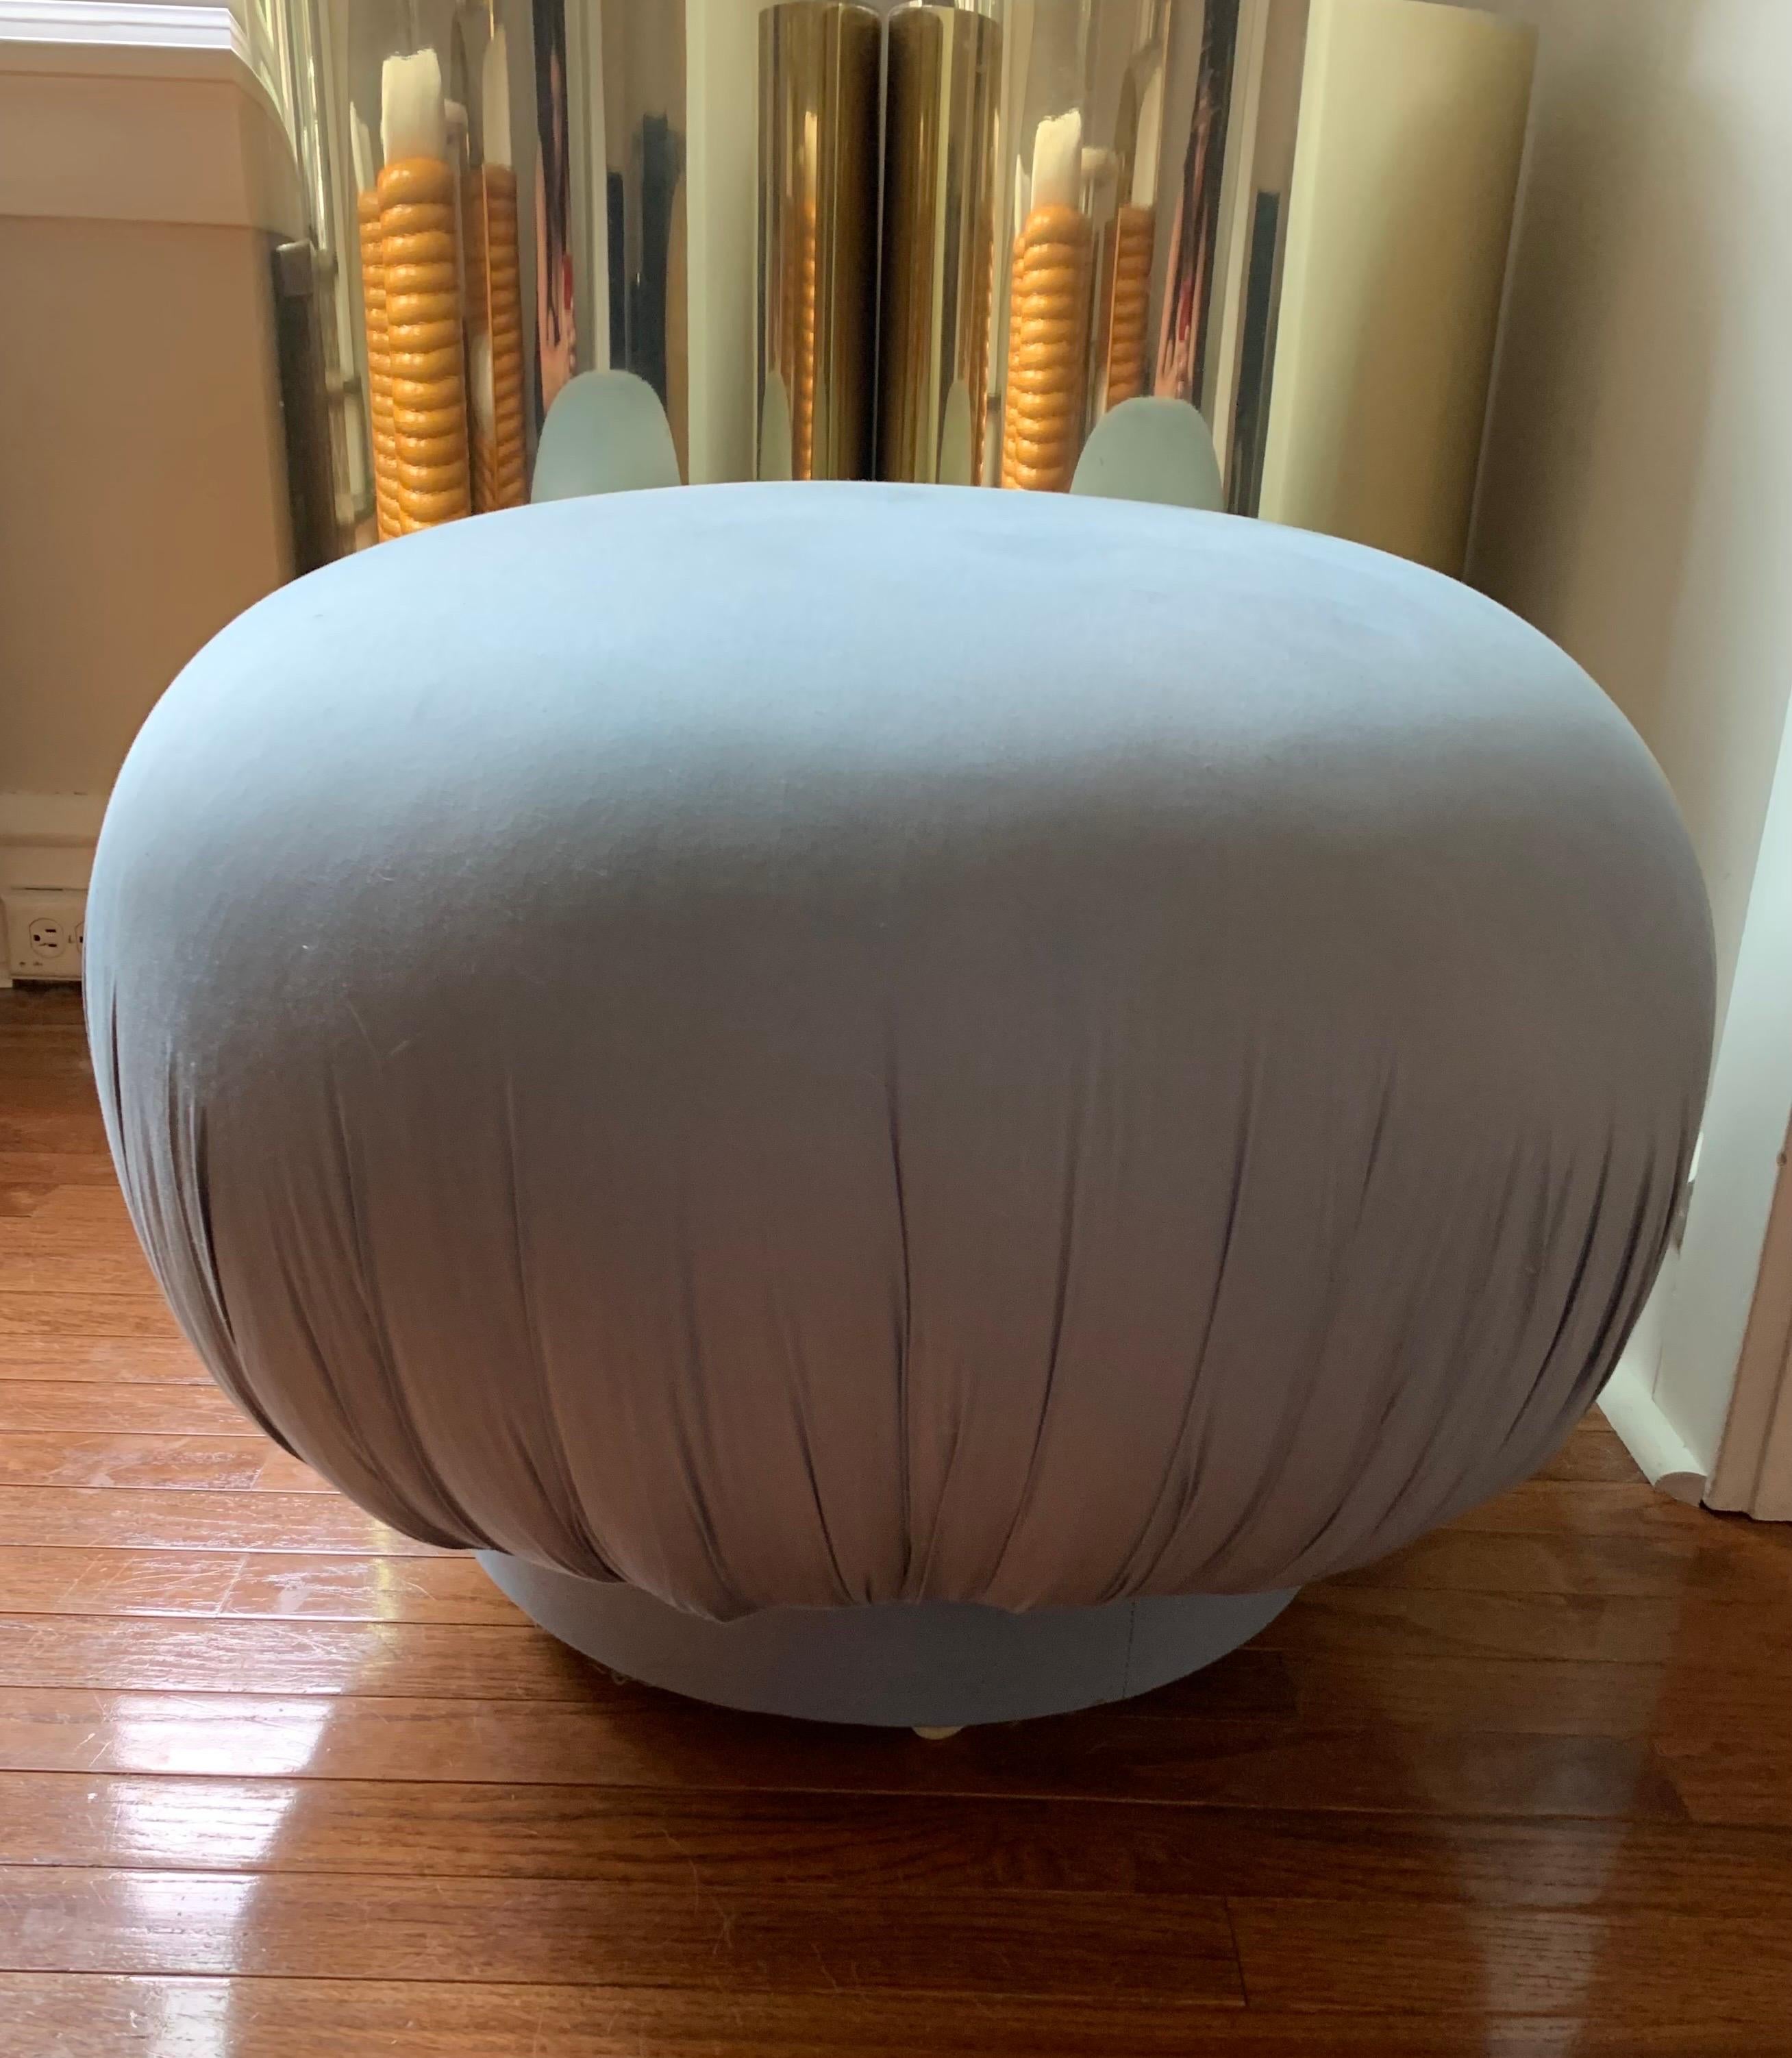 This periwinkle blue chintz pouf ottoman not only swivels, but it also has hidden casters… lots of excitement for a seemingly simple pouf. 

It is a solid piece, purchased from a home that was outfitted with other items labeled Directional, so we